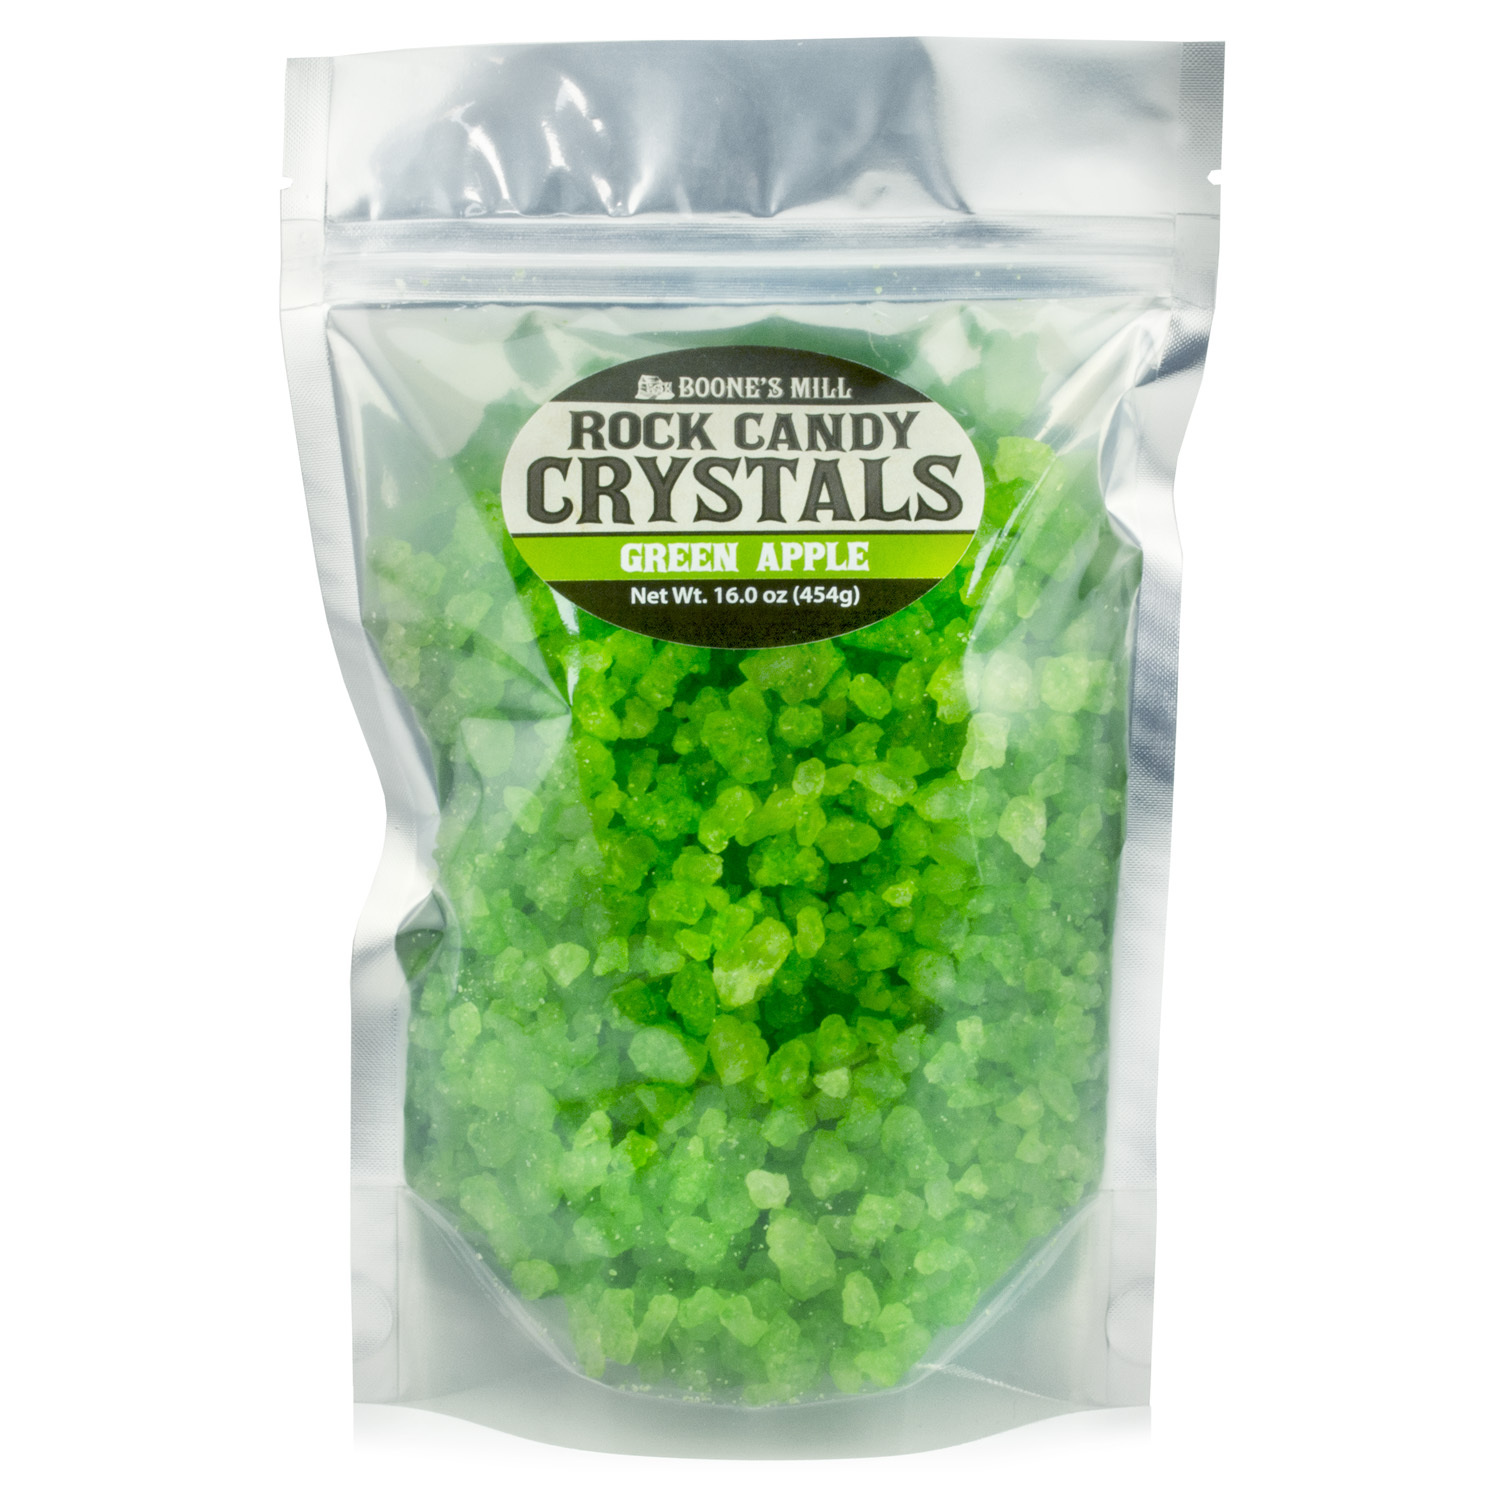 Light Green/Green Apple Rock Candy Crystals in 1 pound bag